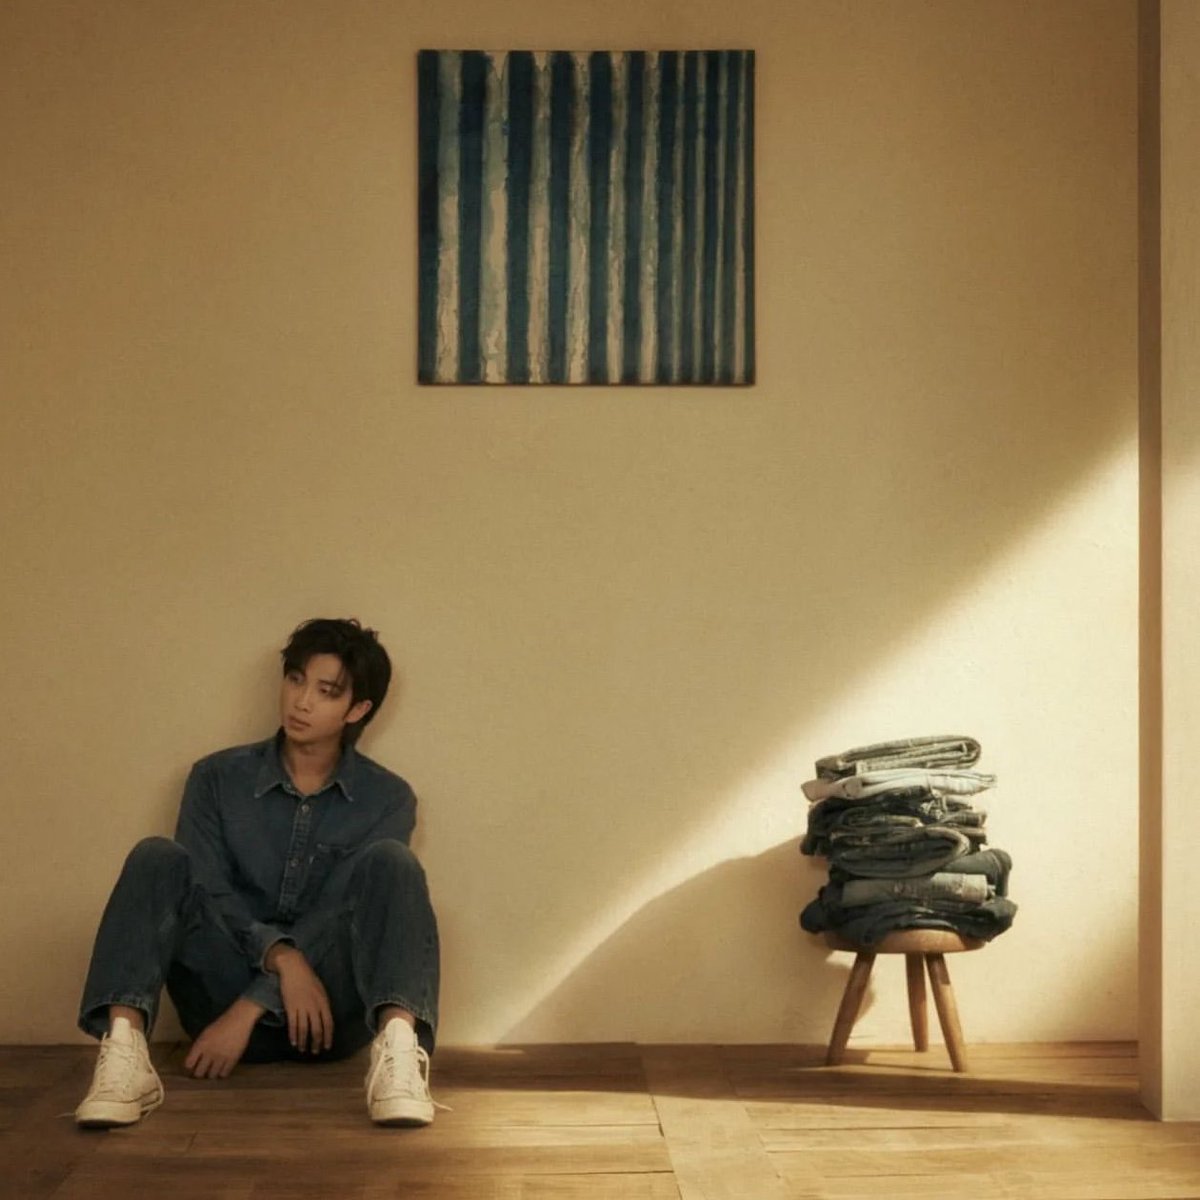 #RM's 'Indigo' remains at the Top 10 of the #UnitedWorldChart at #6 in the Global Album Chart with 107,000 equivalent sales this week and 536,000 in total